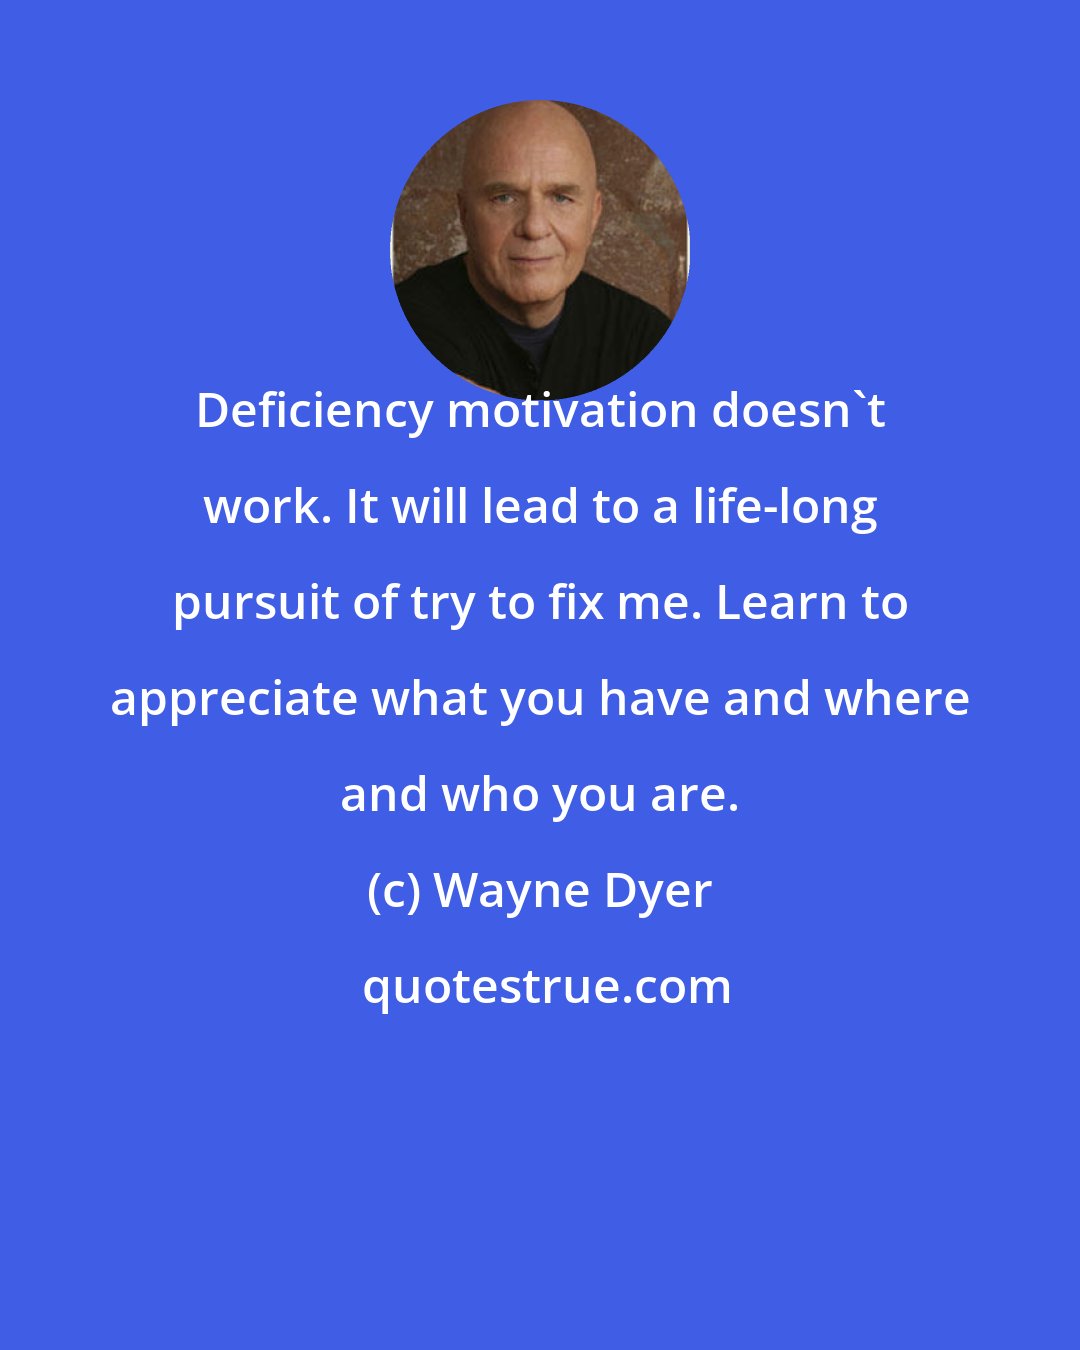 Wayne Dyer: Deficiency motivation doesn't work. It will lead to a life-long pursuit of try to fix me. Learn to appreciate what you have and where and who you are.